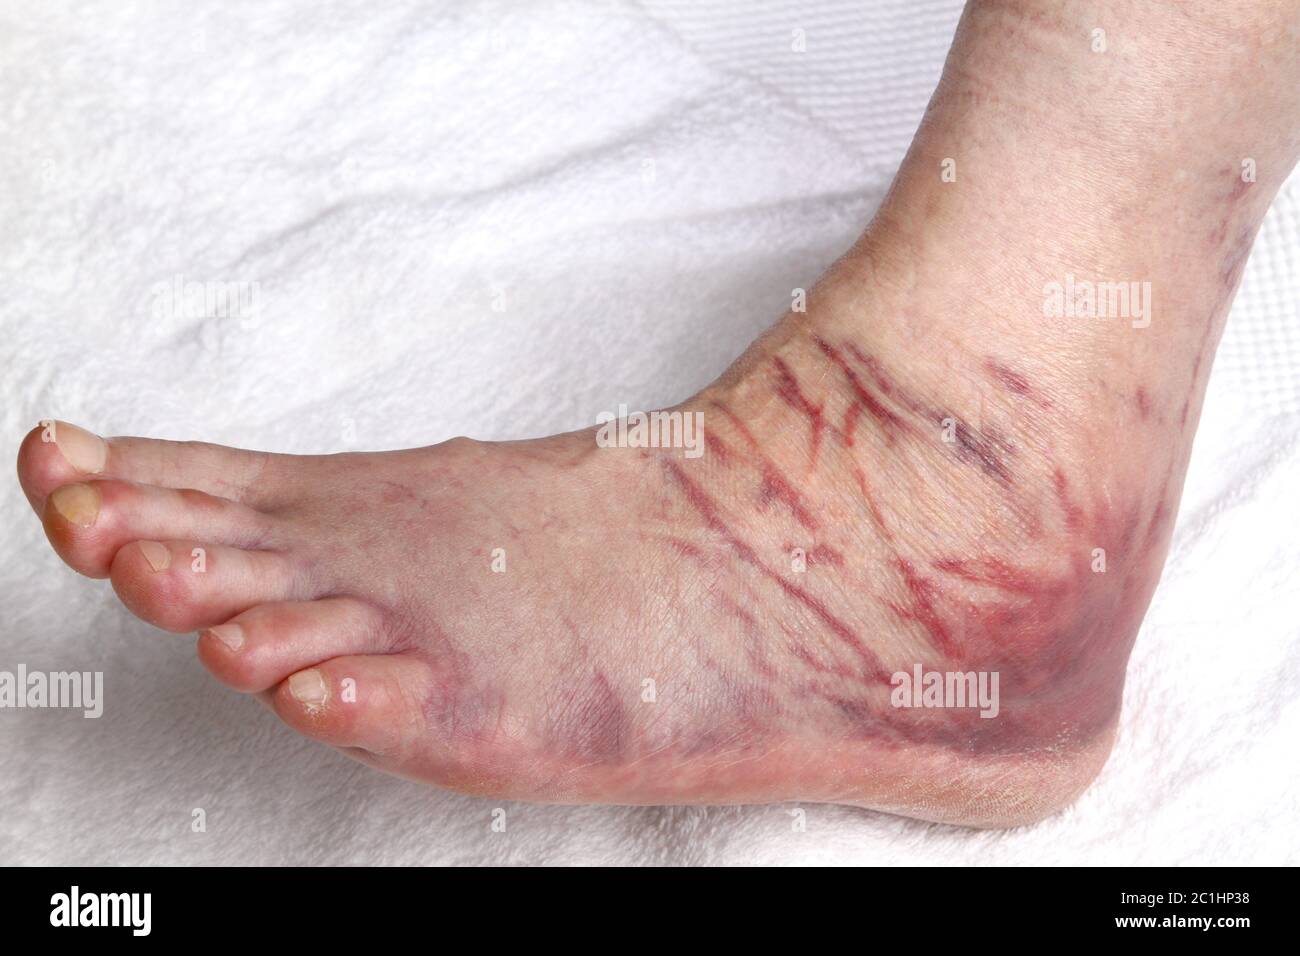 ligament rupture on ankle joint Stock Photo